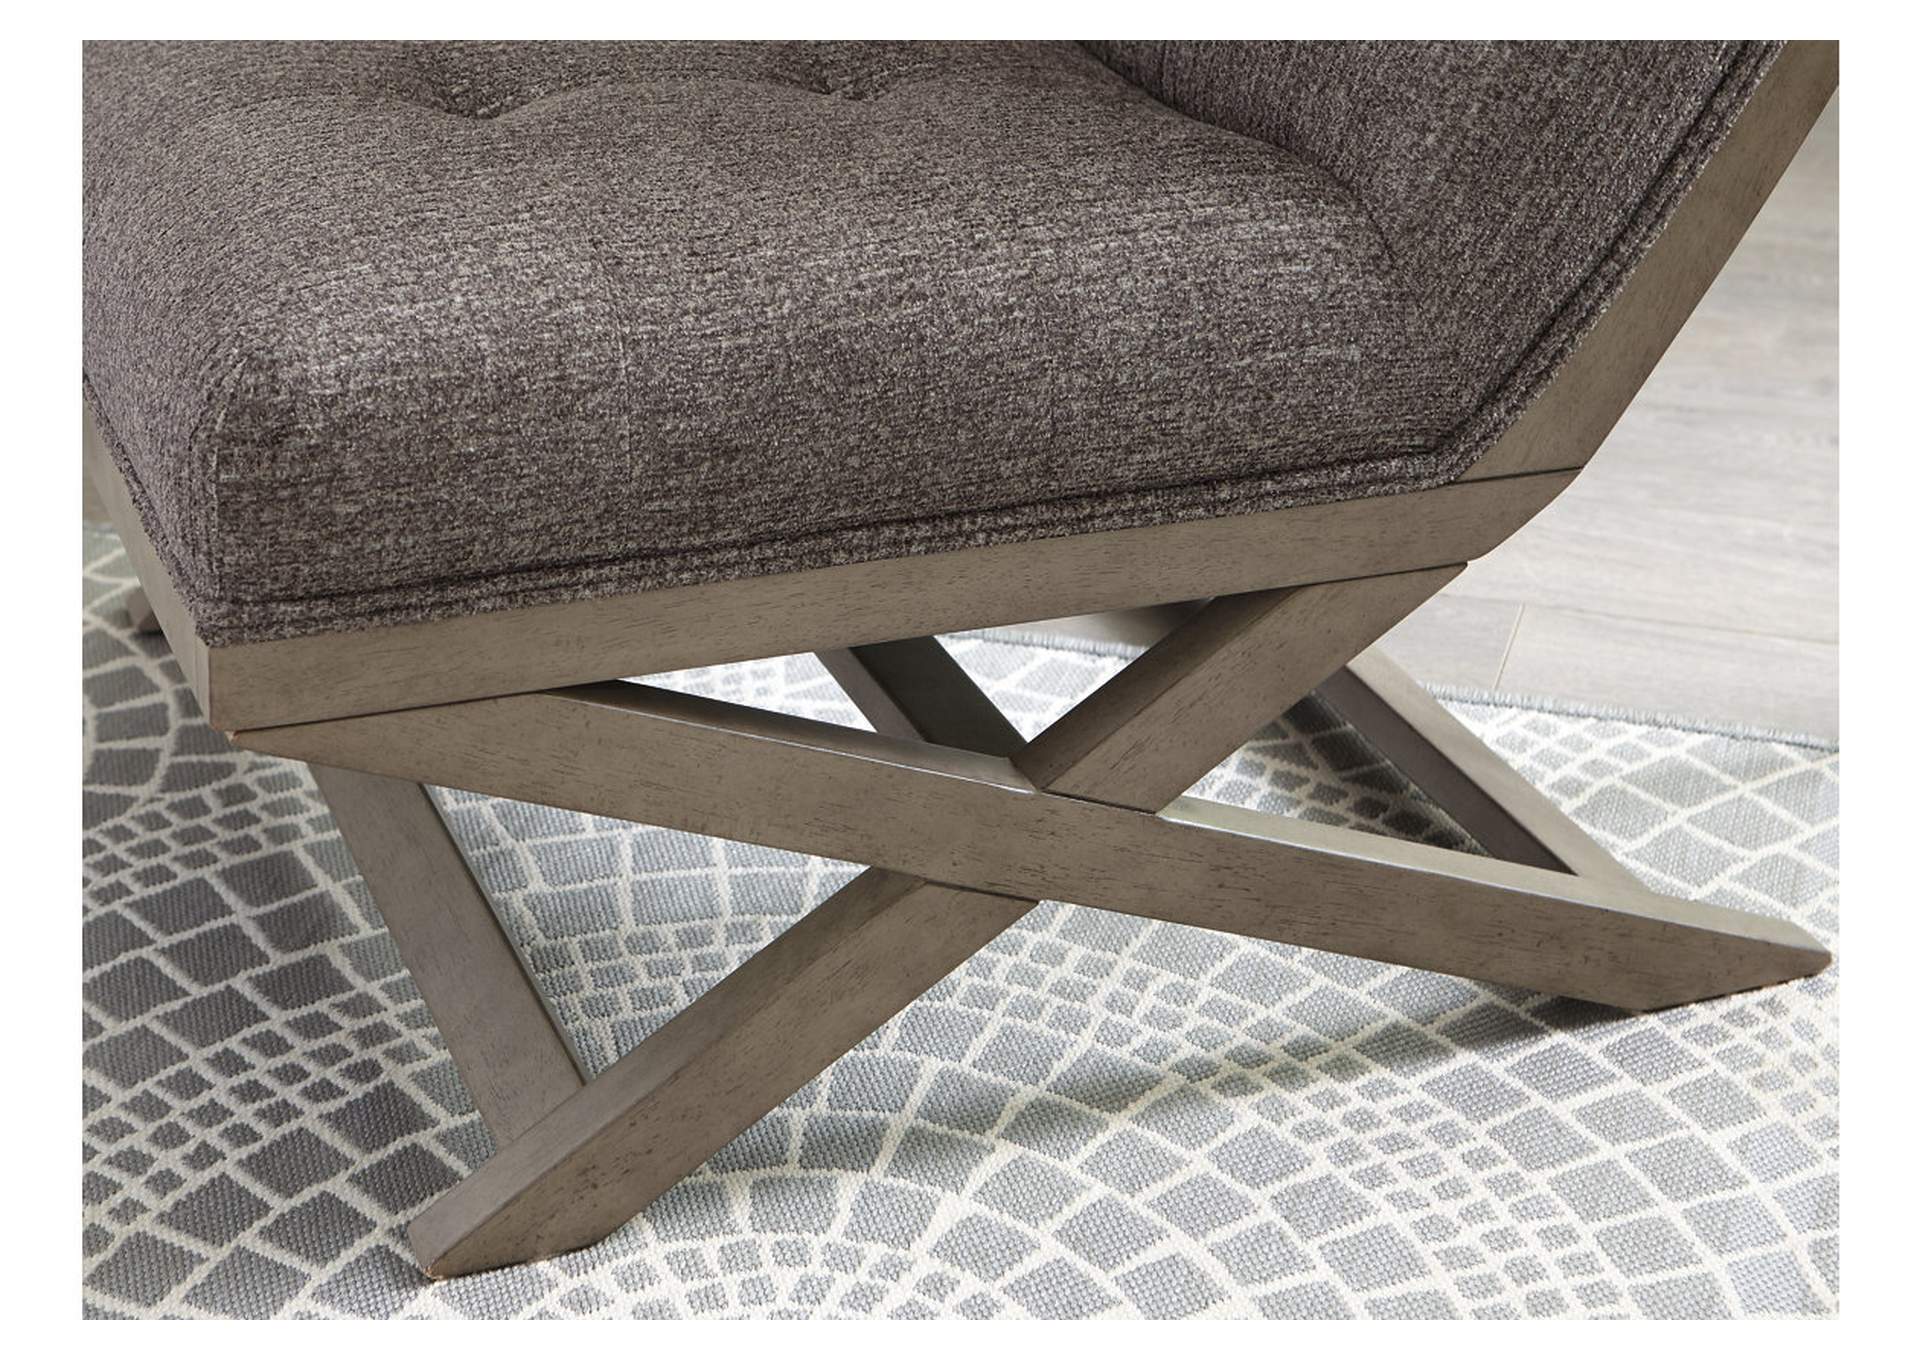 Sidewinder Accent Chair,Signature Design By Ashley